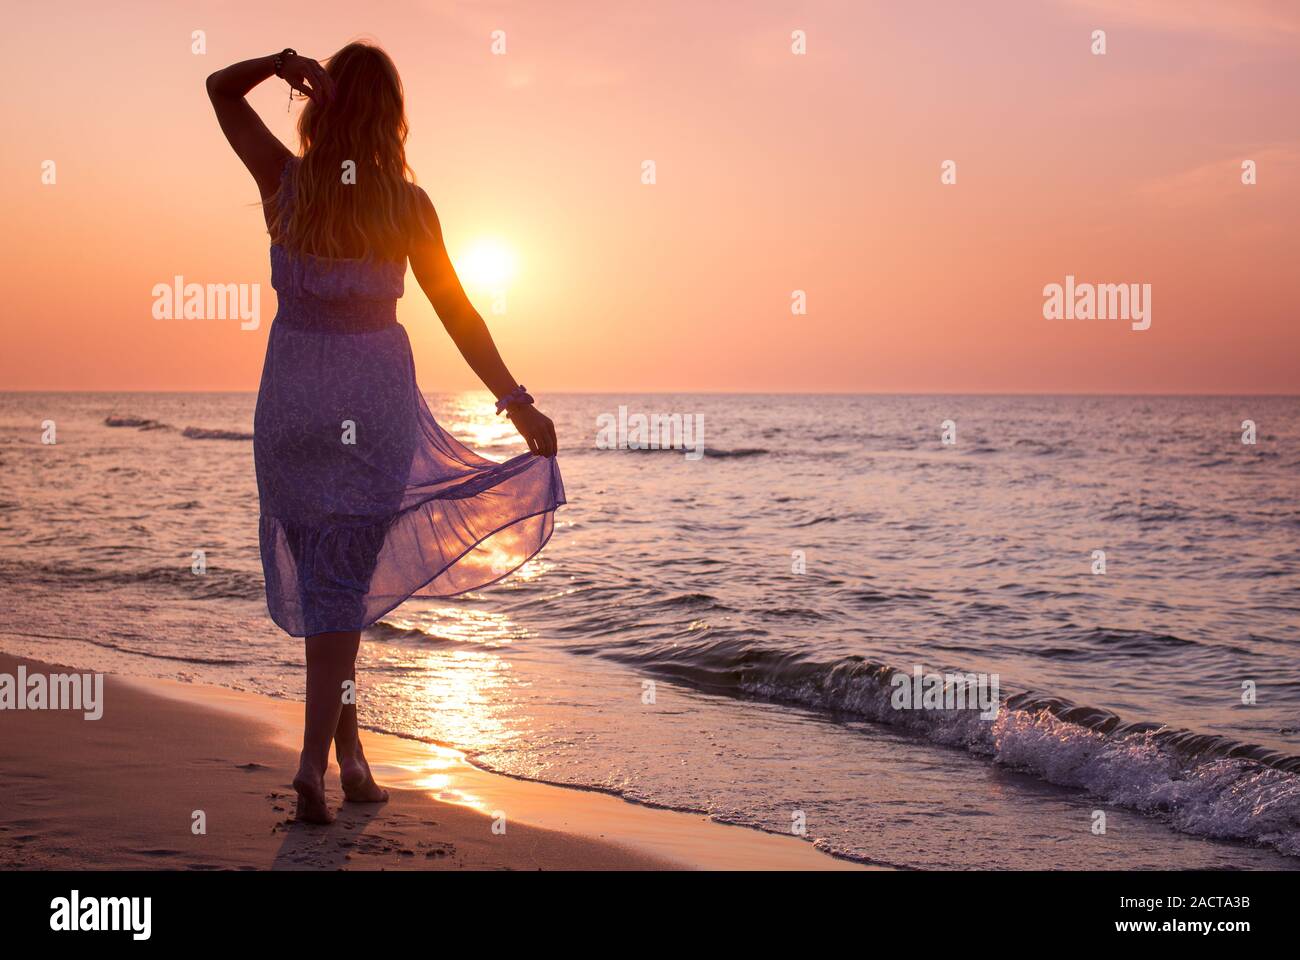 Happy Carefree Woman In The Blue Dress Enjoying Beautiful Sunset On The Beach Lady S Silhouette Against Colorful Calm Sunset Beach Stock Photo Alamy